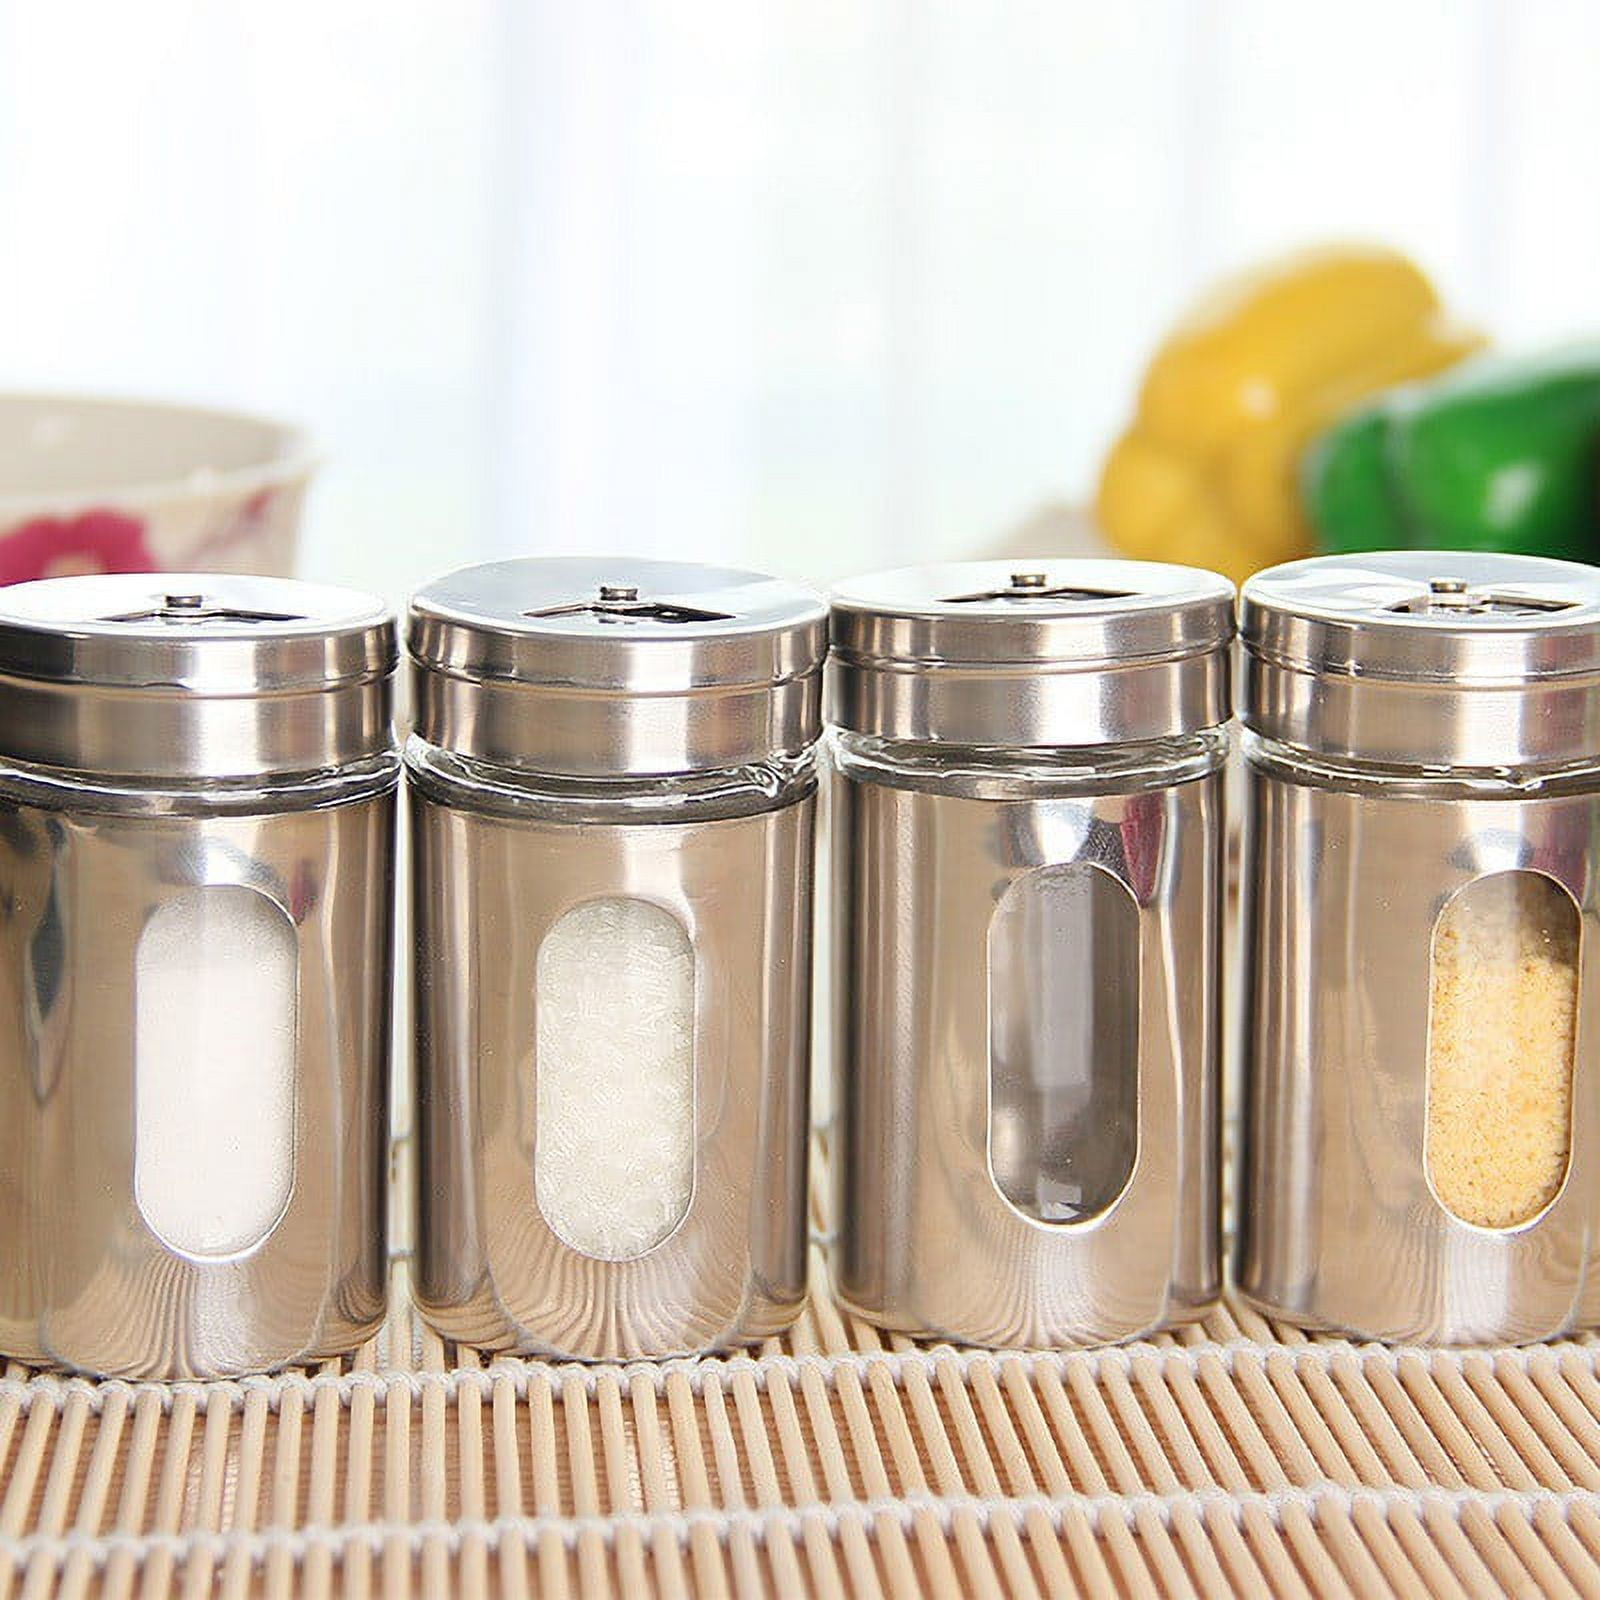 Wholesale Set Of 120ml Glass Spice Jars With Shaker Lids And Airtight Press  Metal Share Price Caps 4oz Square Containers From Chaplin, $1.79